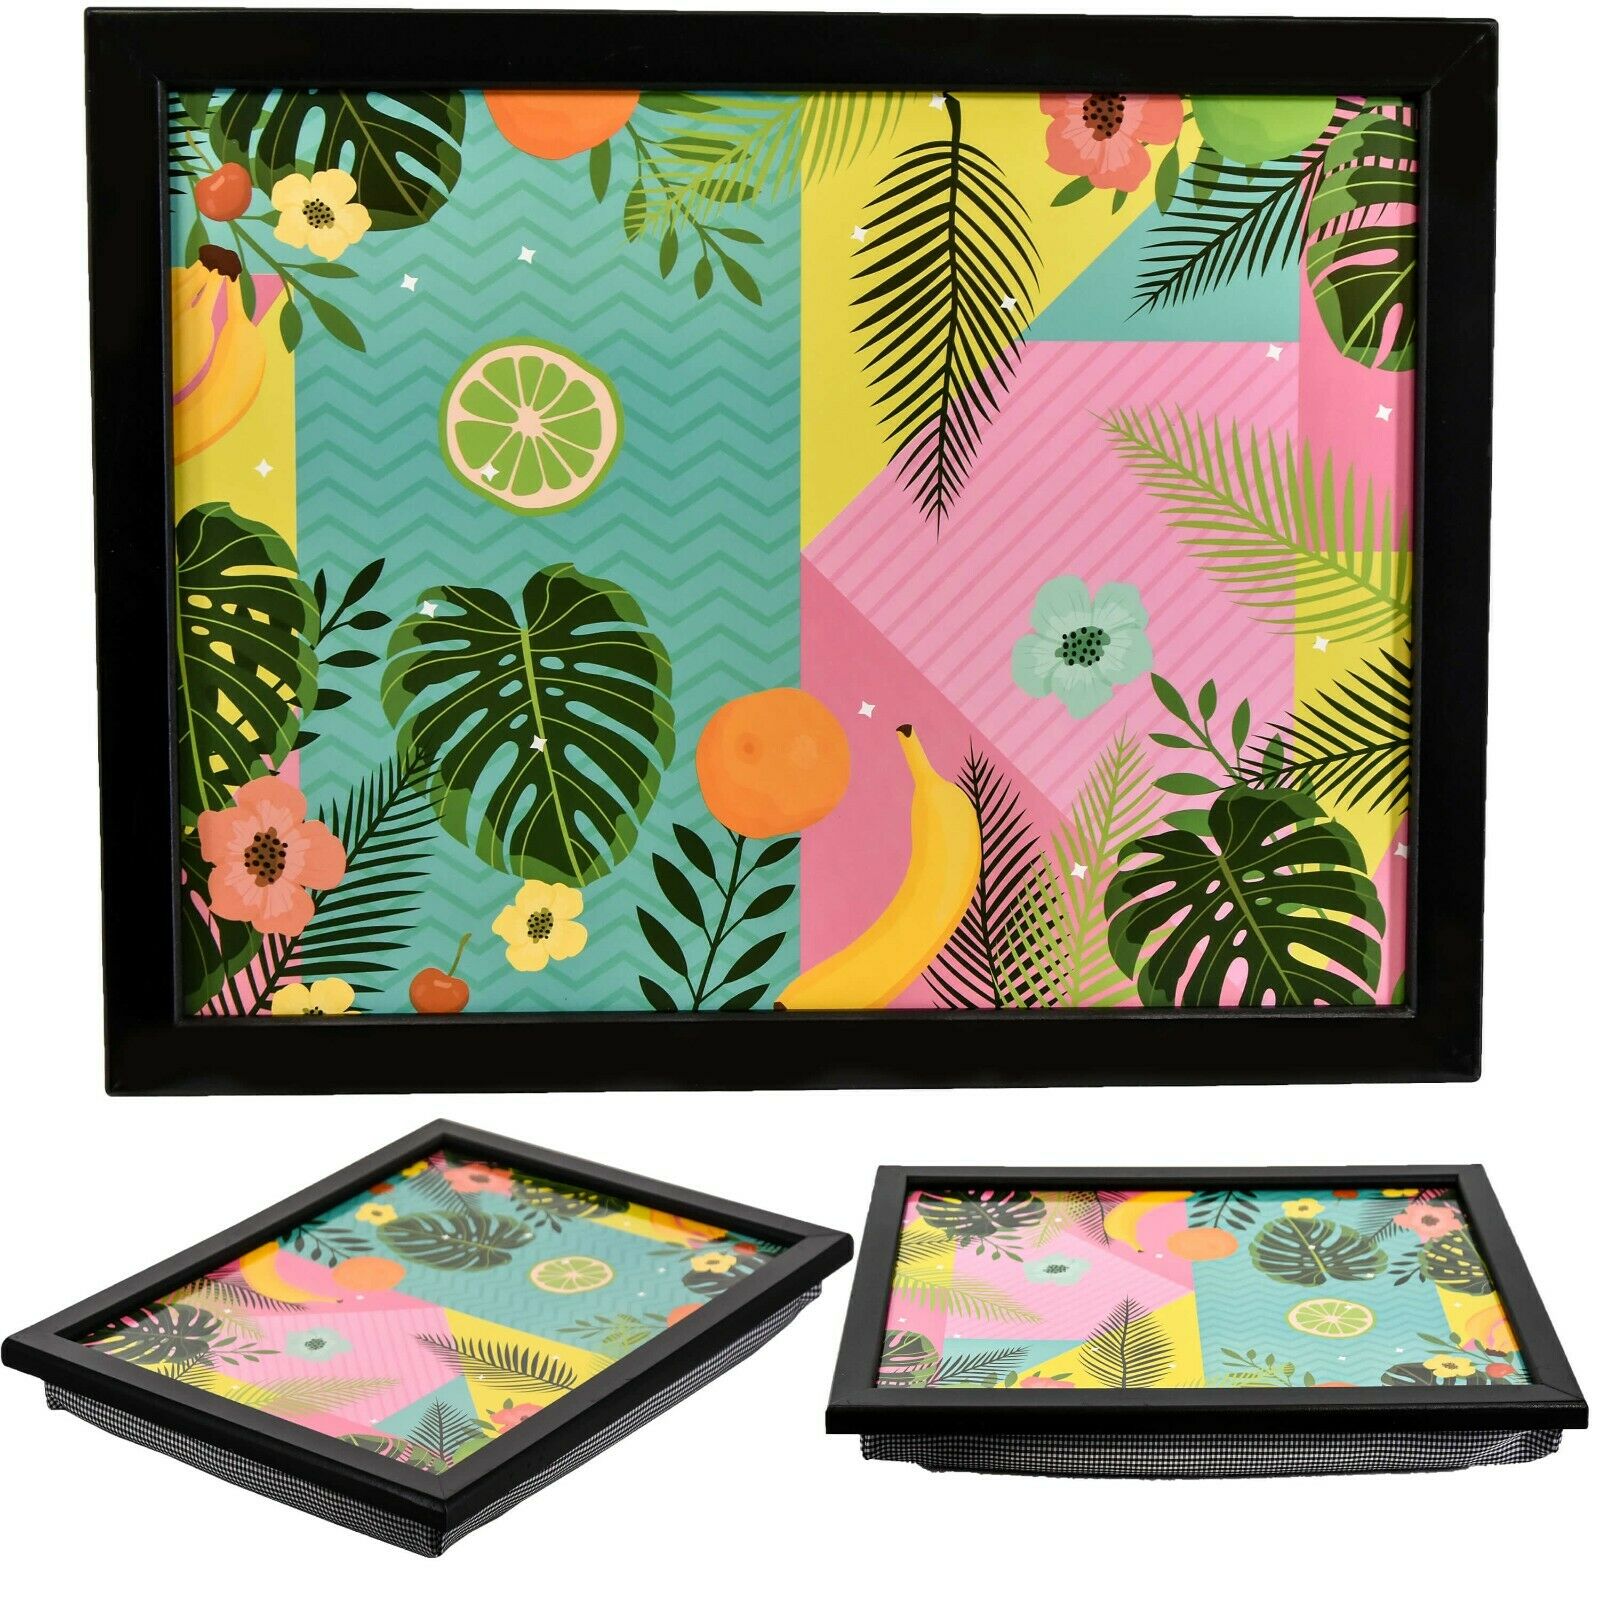 Tropical Fruit Lap Tray With Bean Bag Cushion The Magic Toy Shop - The Magic Toy Shop